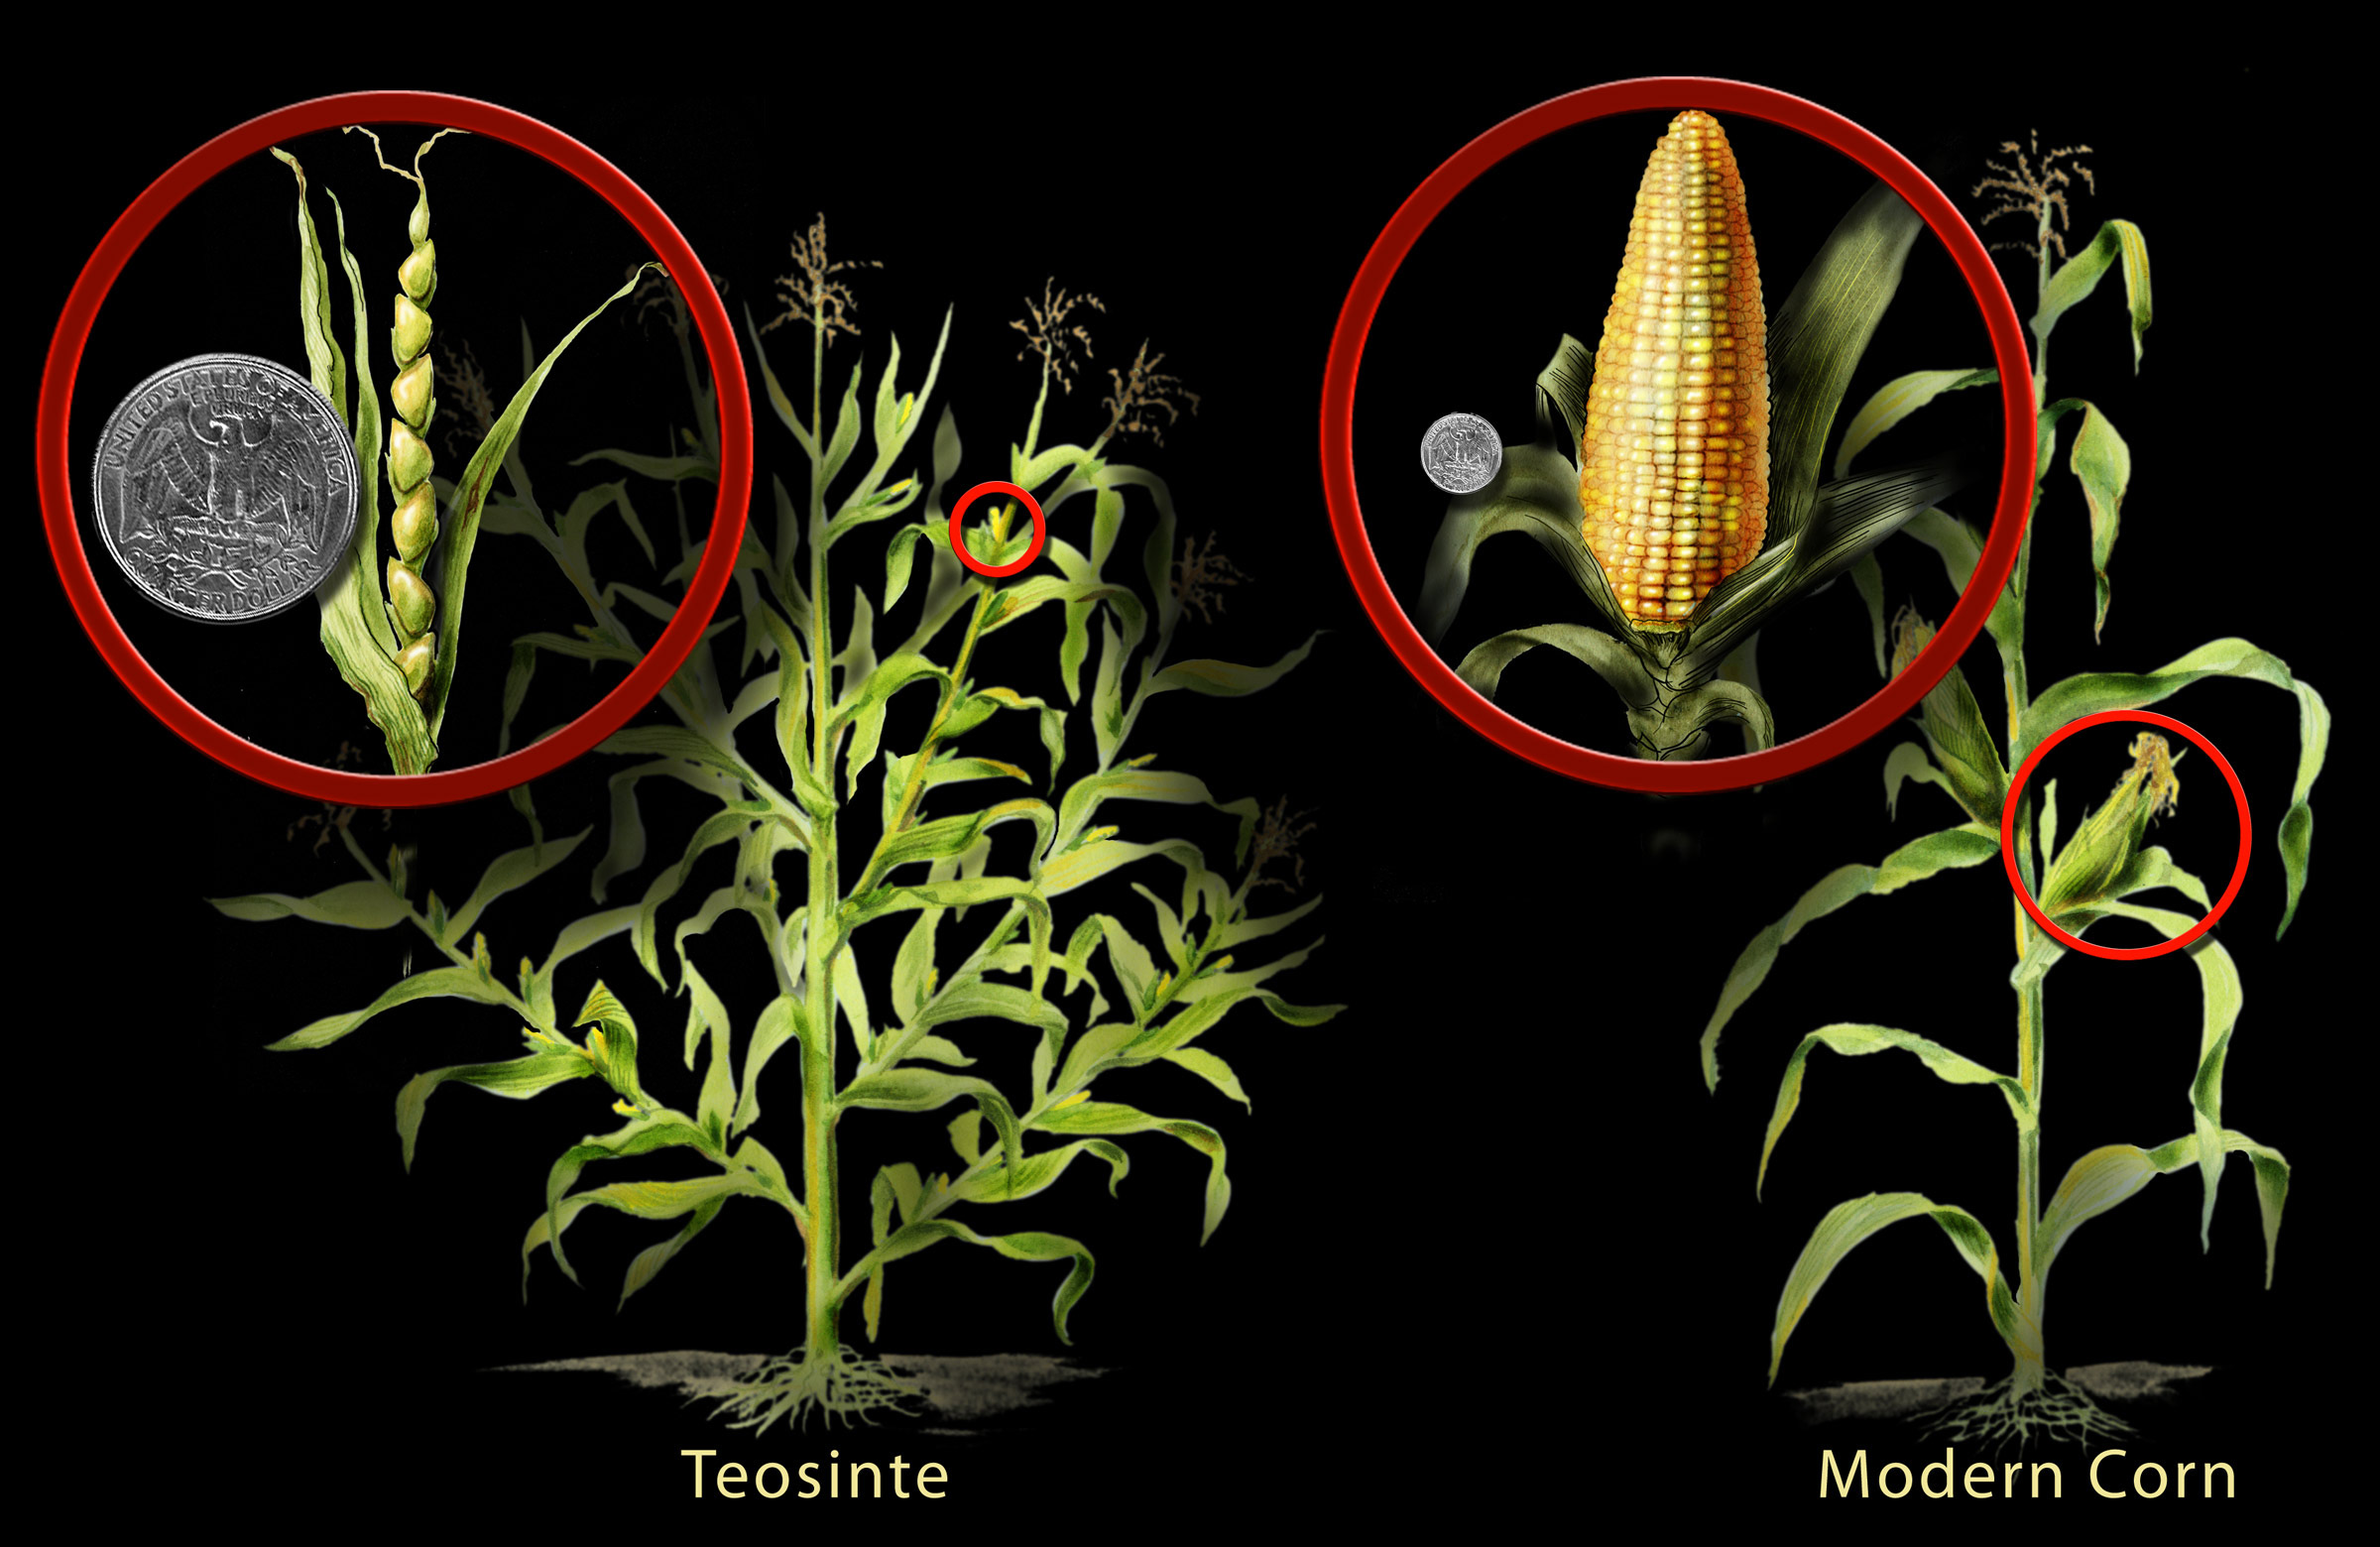 Teosinte and modern corn. The latter has much larger cobs with bigger, juicier, and yellower kernels.